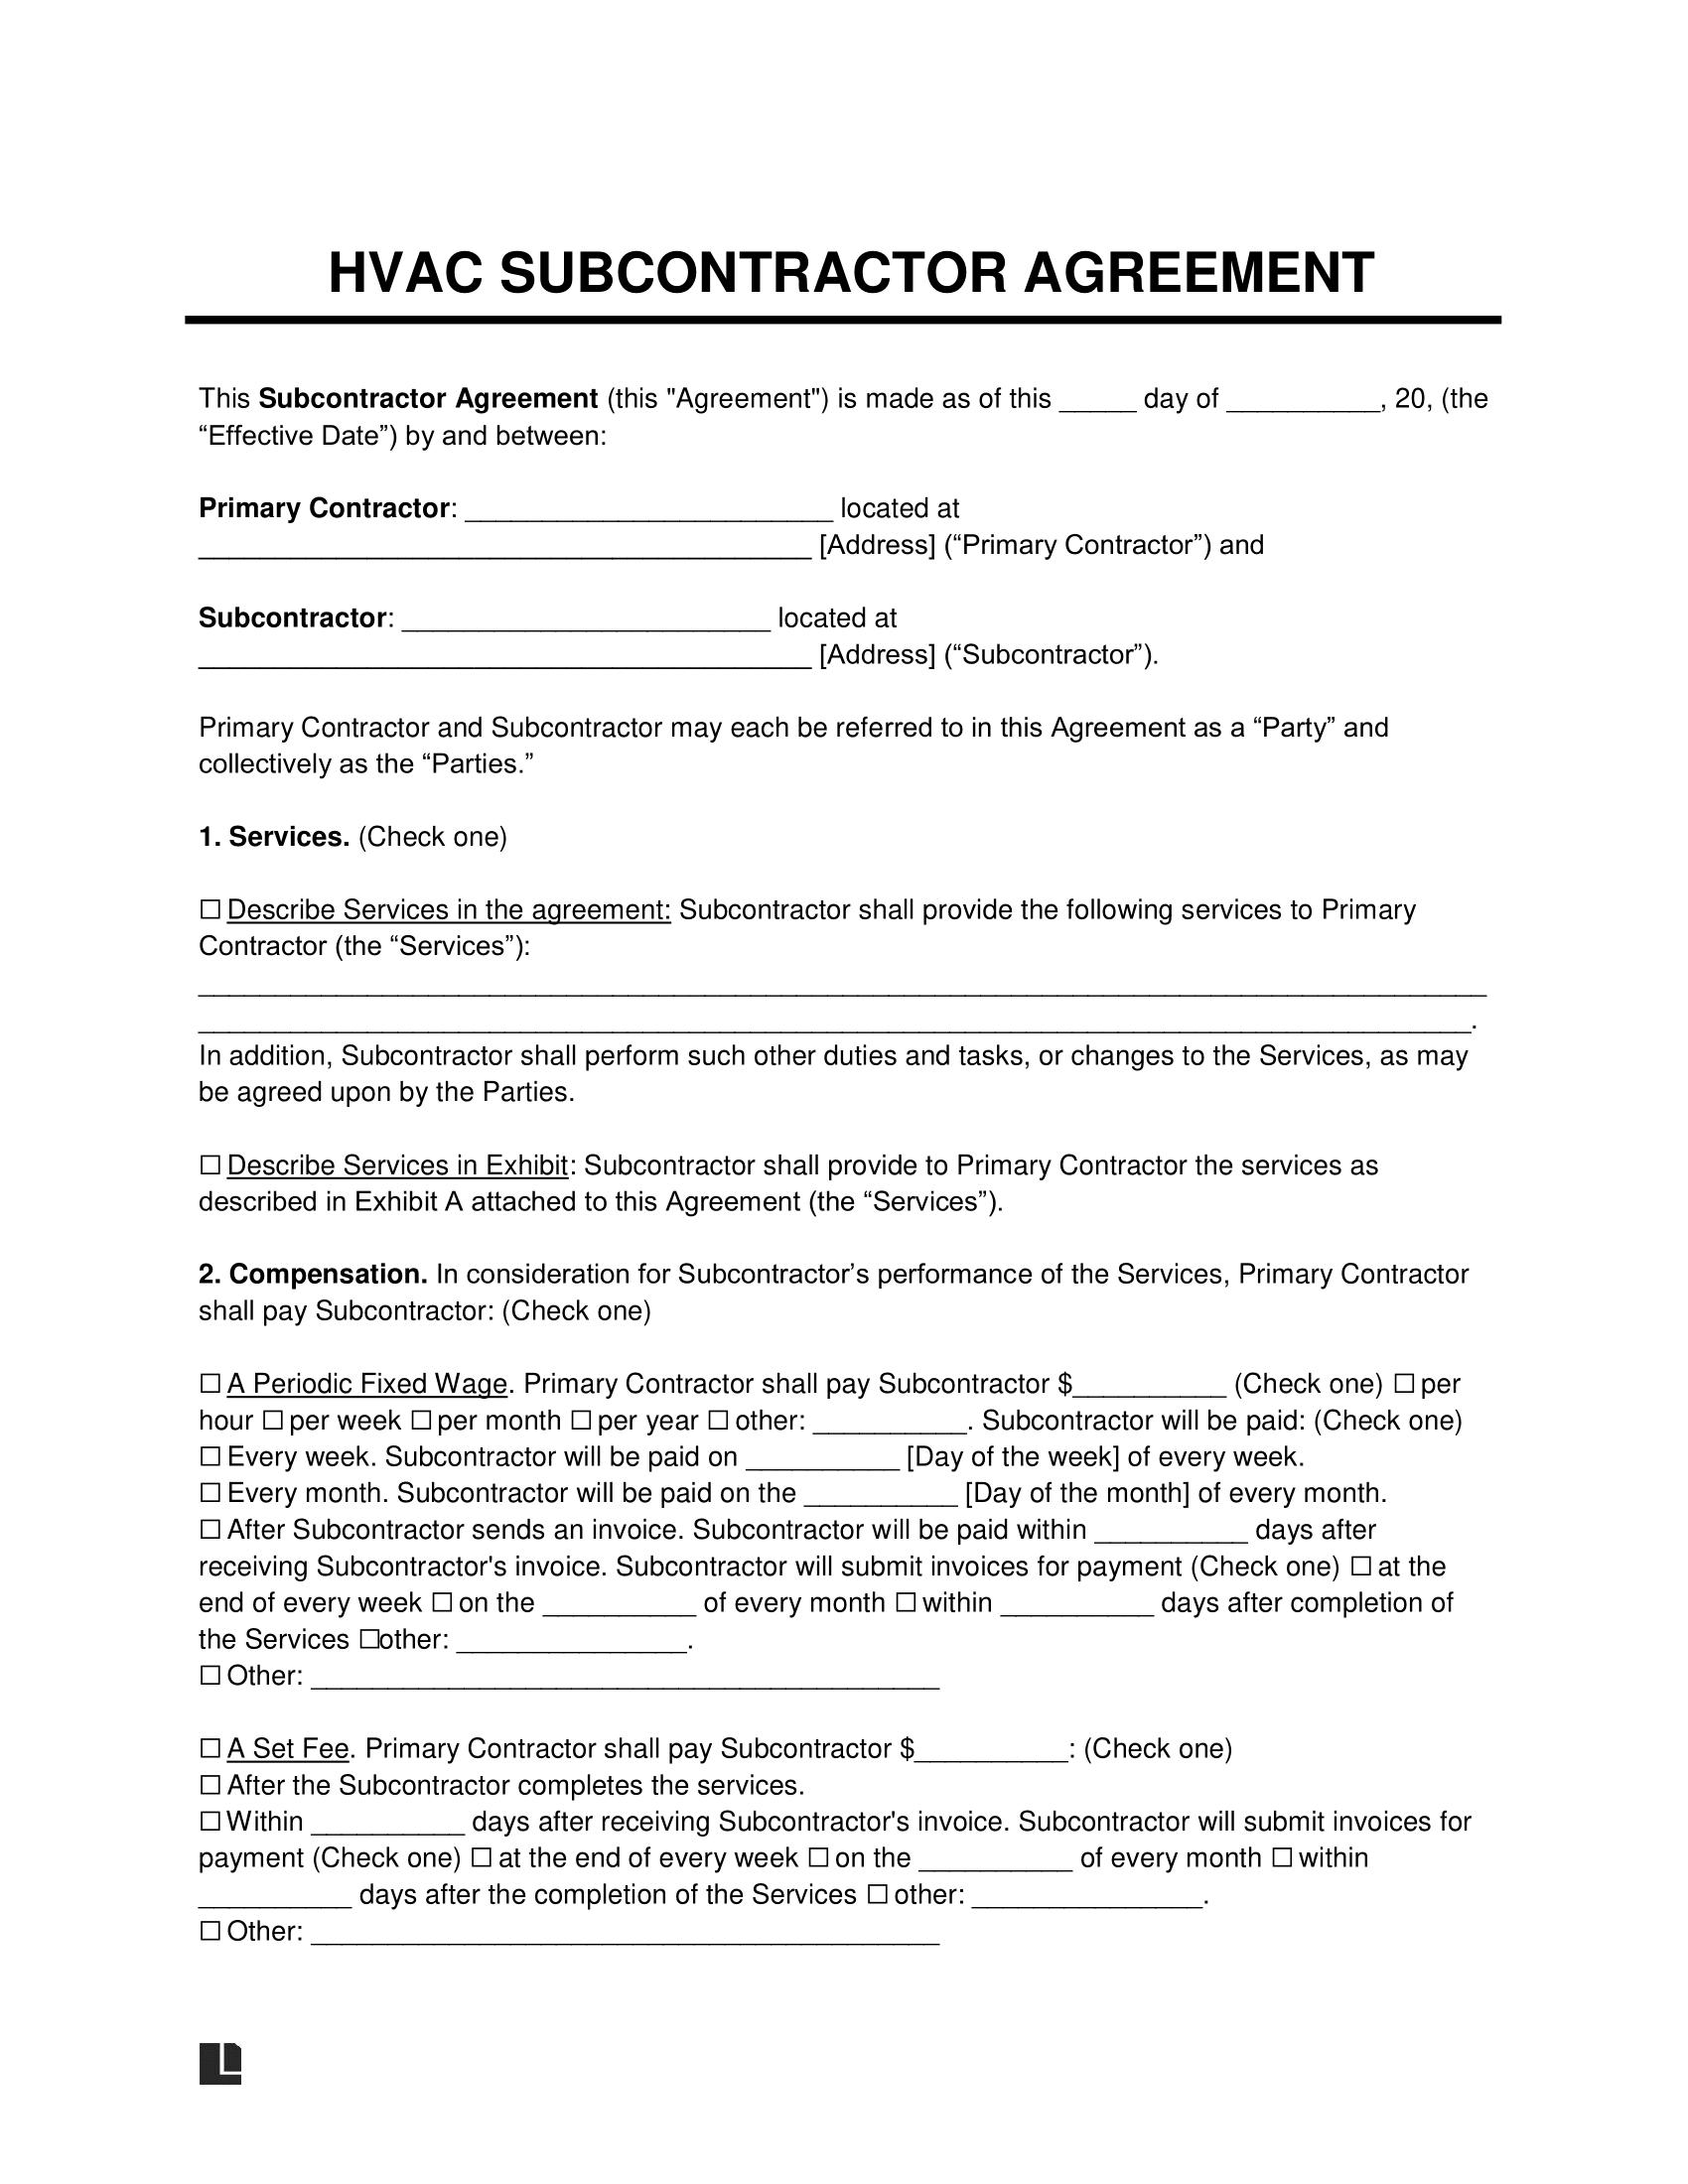 HVAC Subcontractor Agreement Template